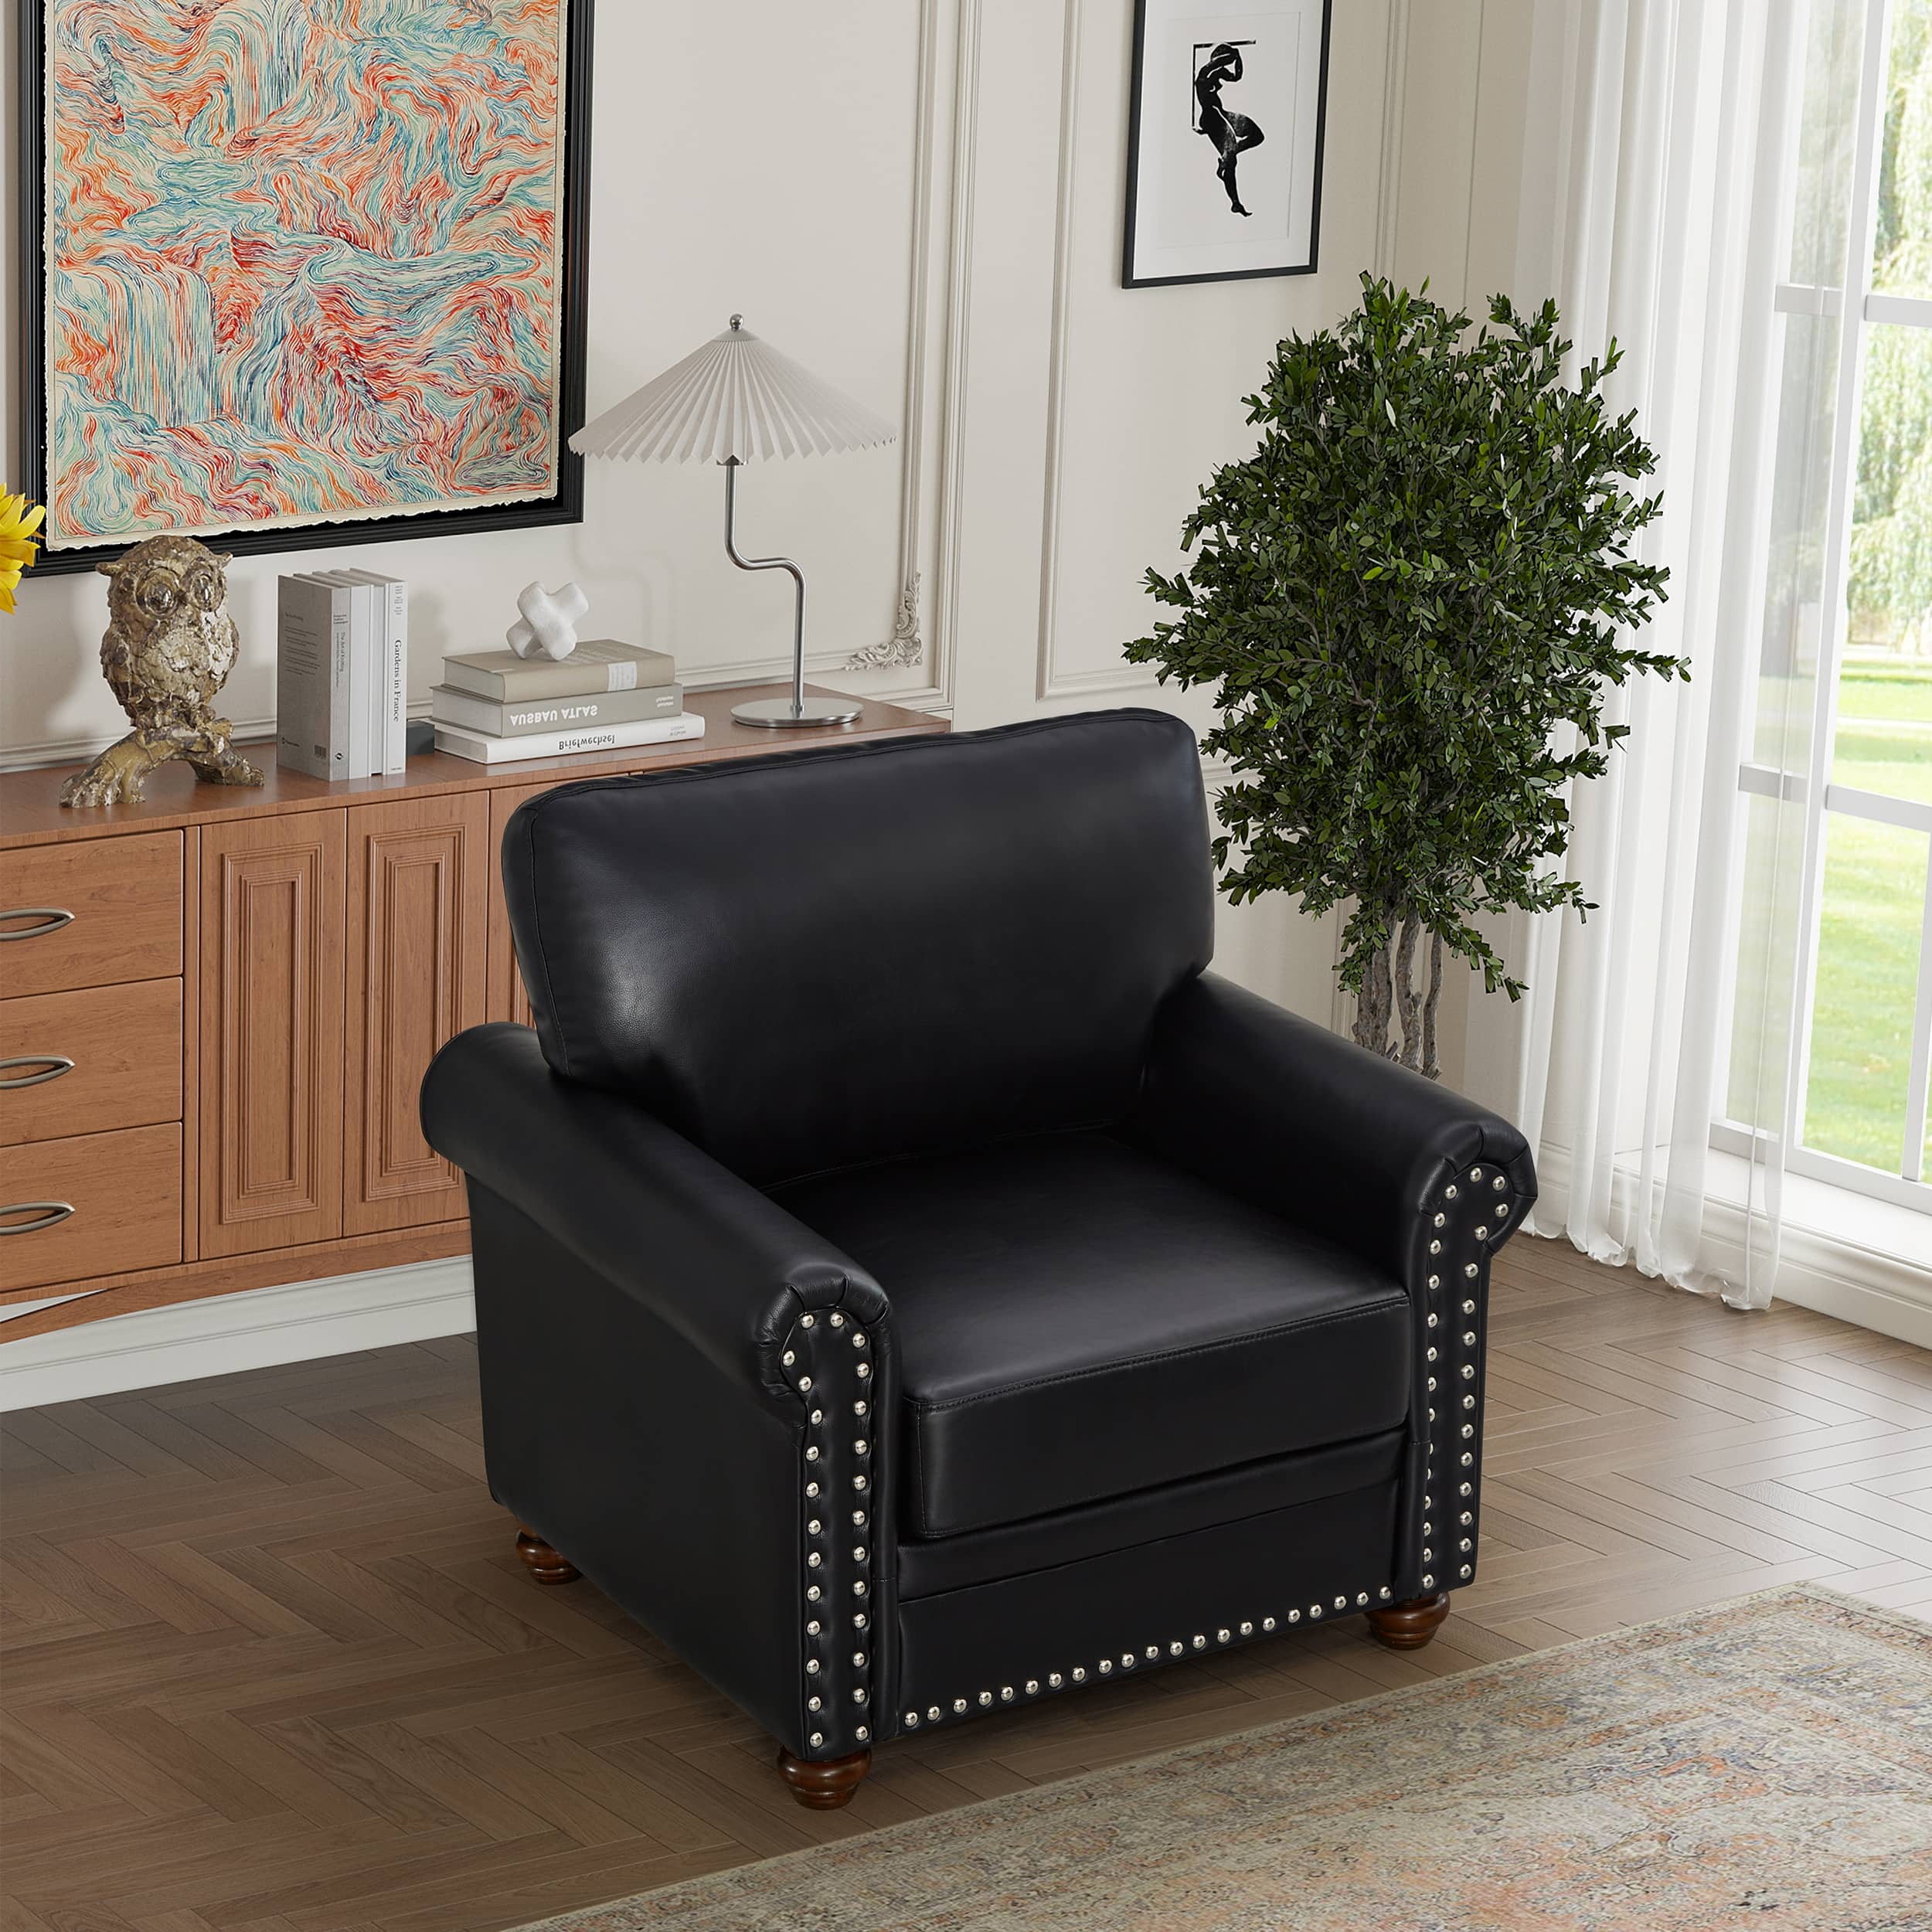 Living Room Sofa Single Seat Chair with Wood Leg Black Faux Leather ...